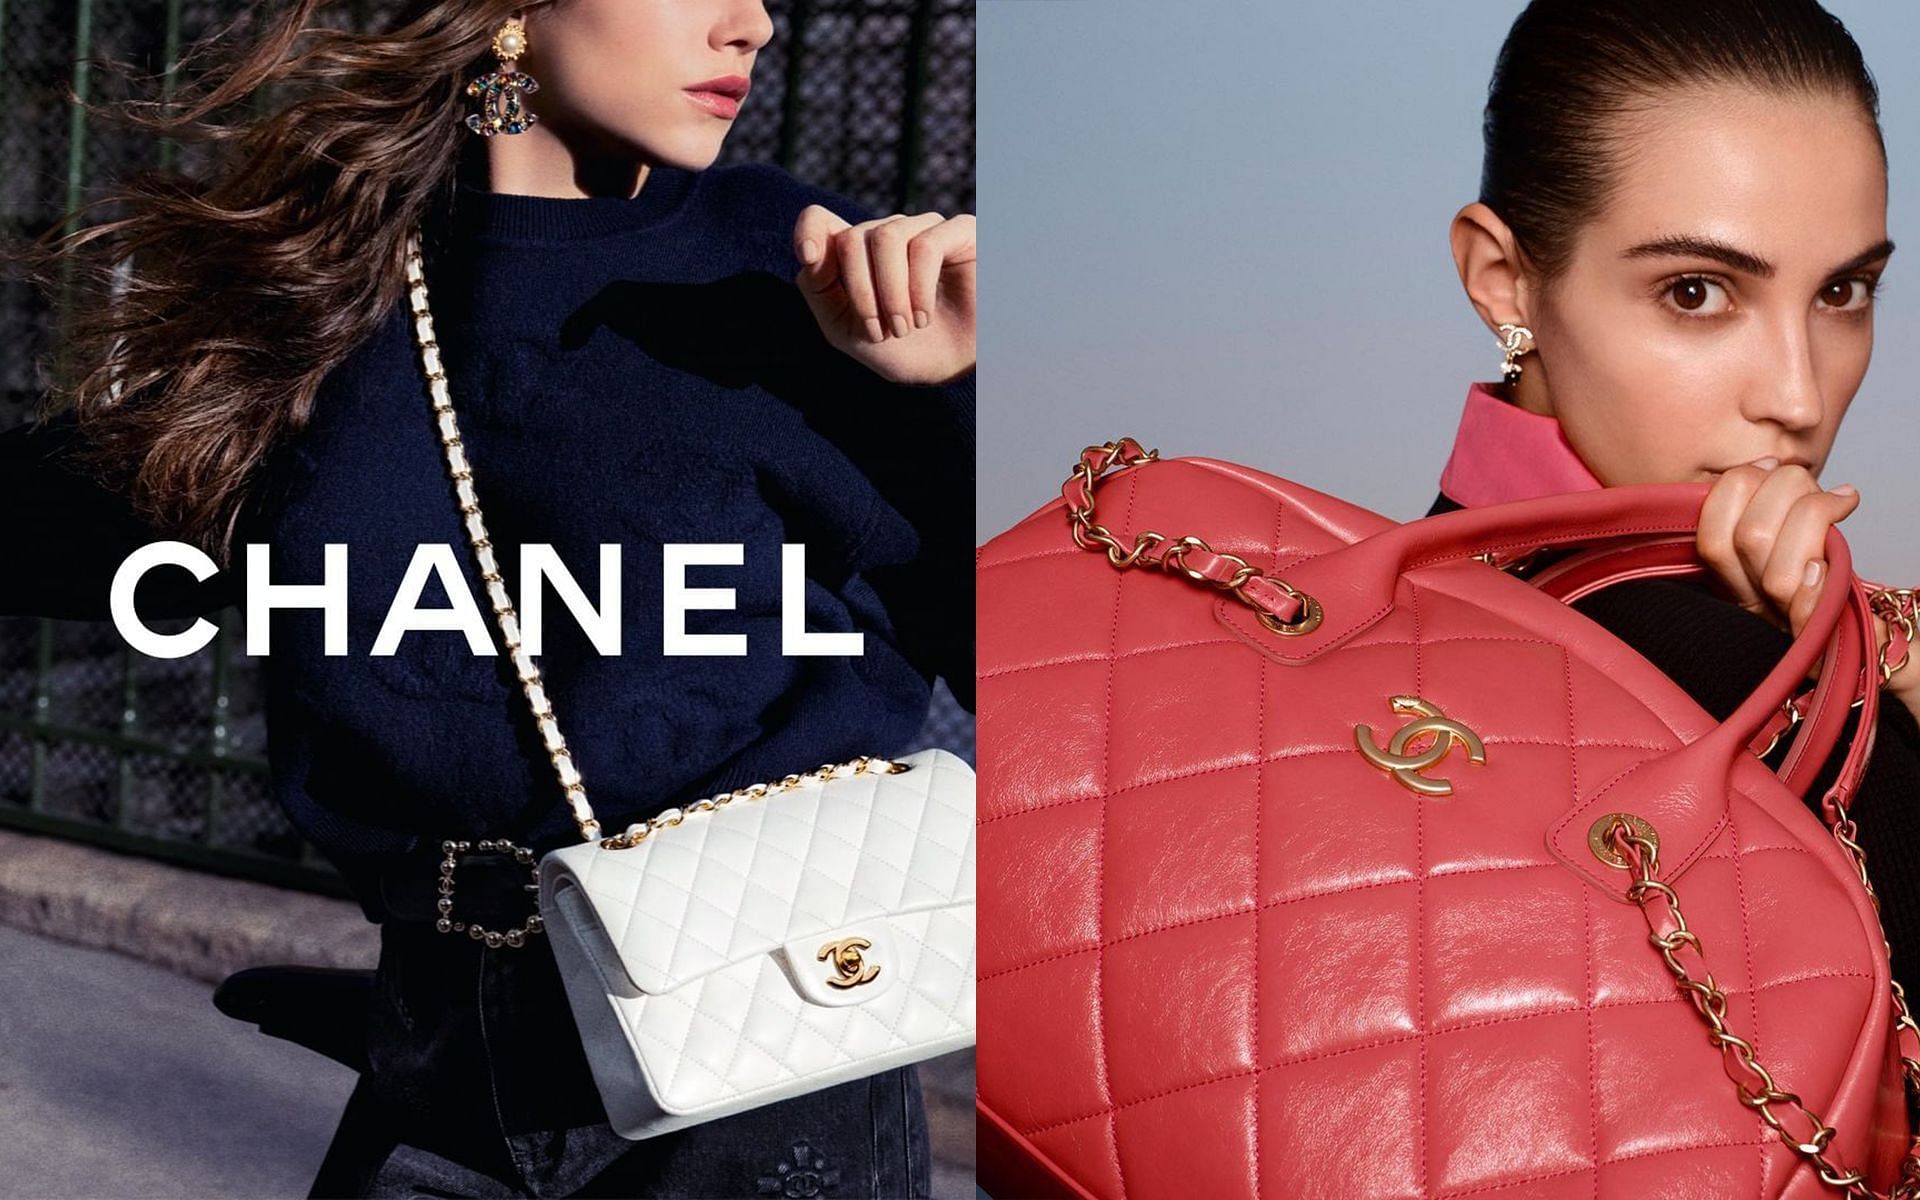 CLN - The Arashel Handbag is the perfect match for your